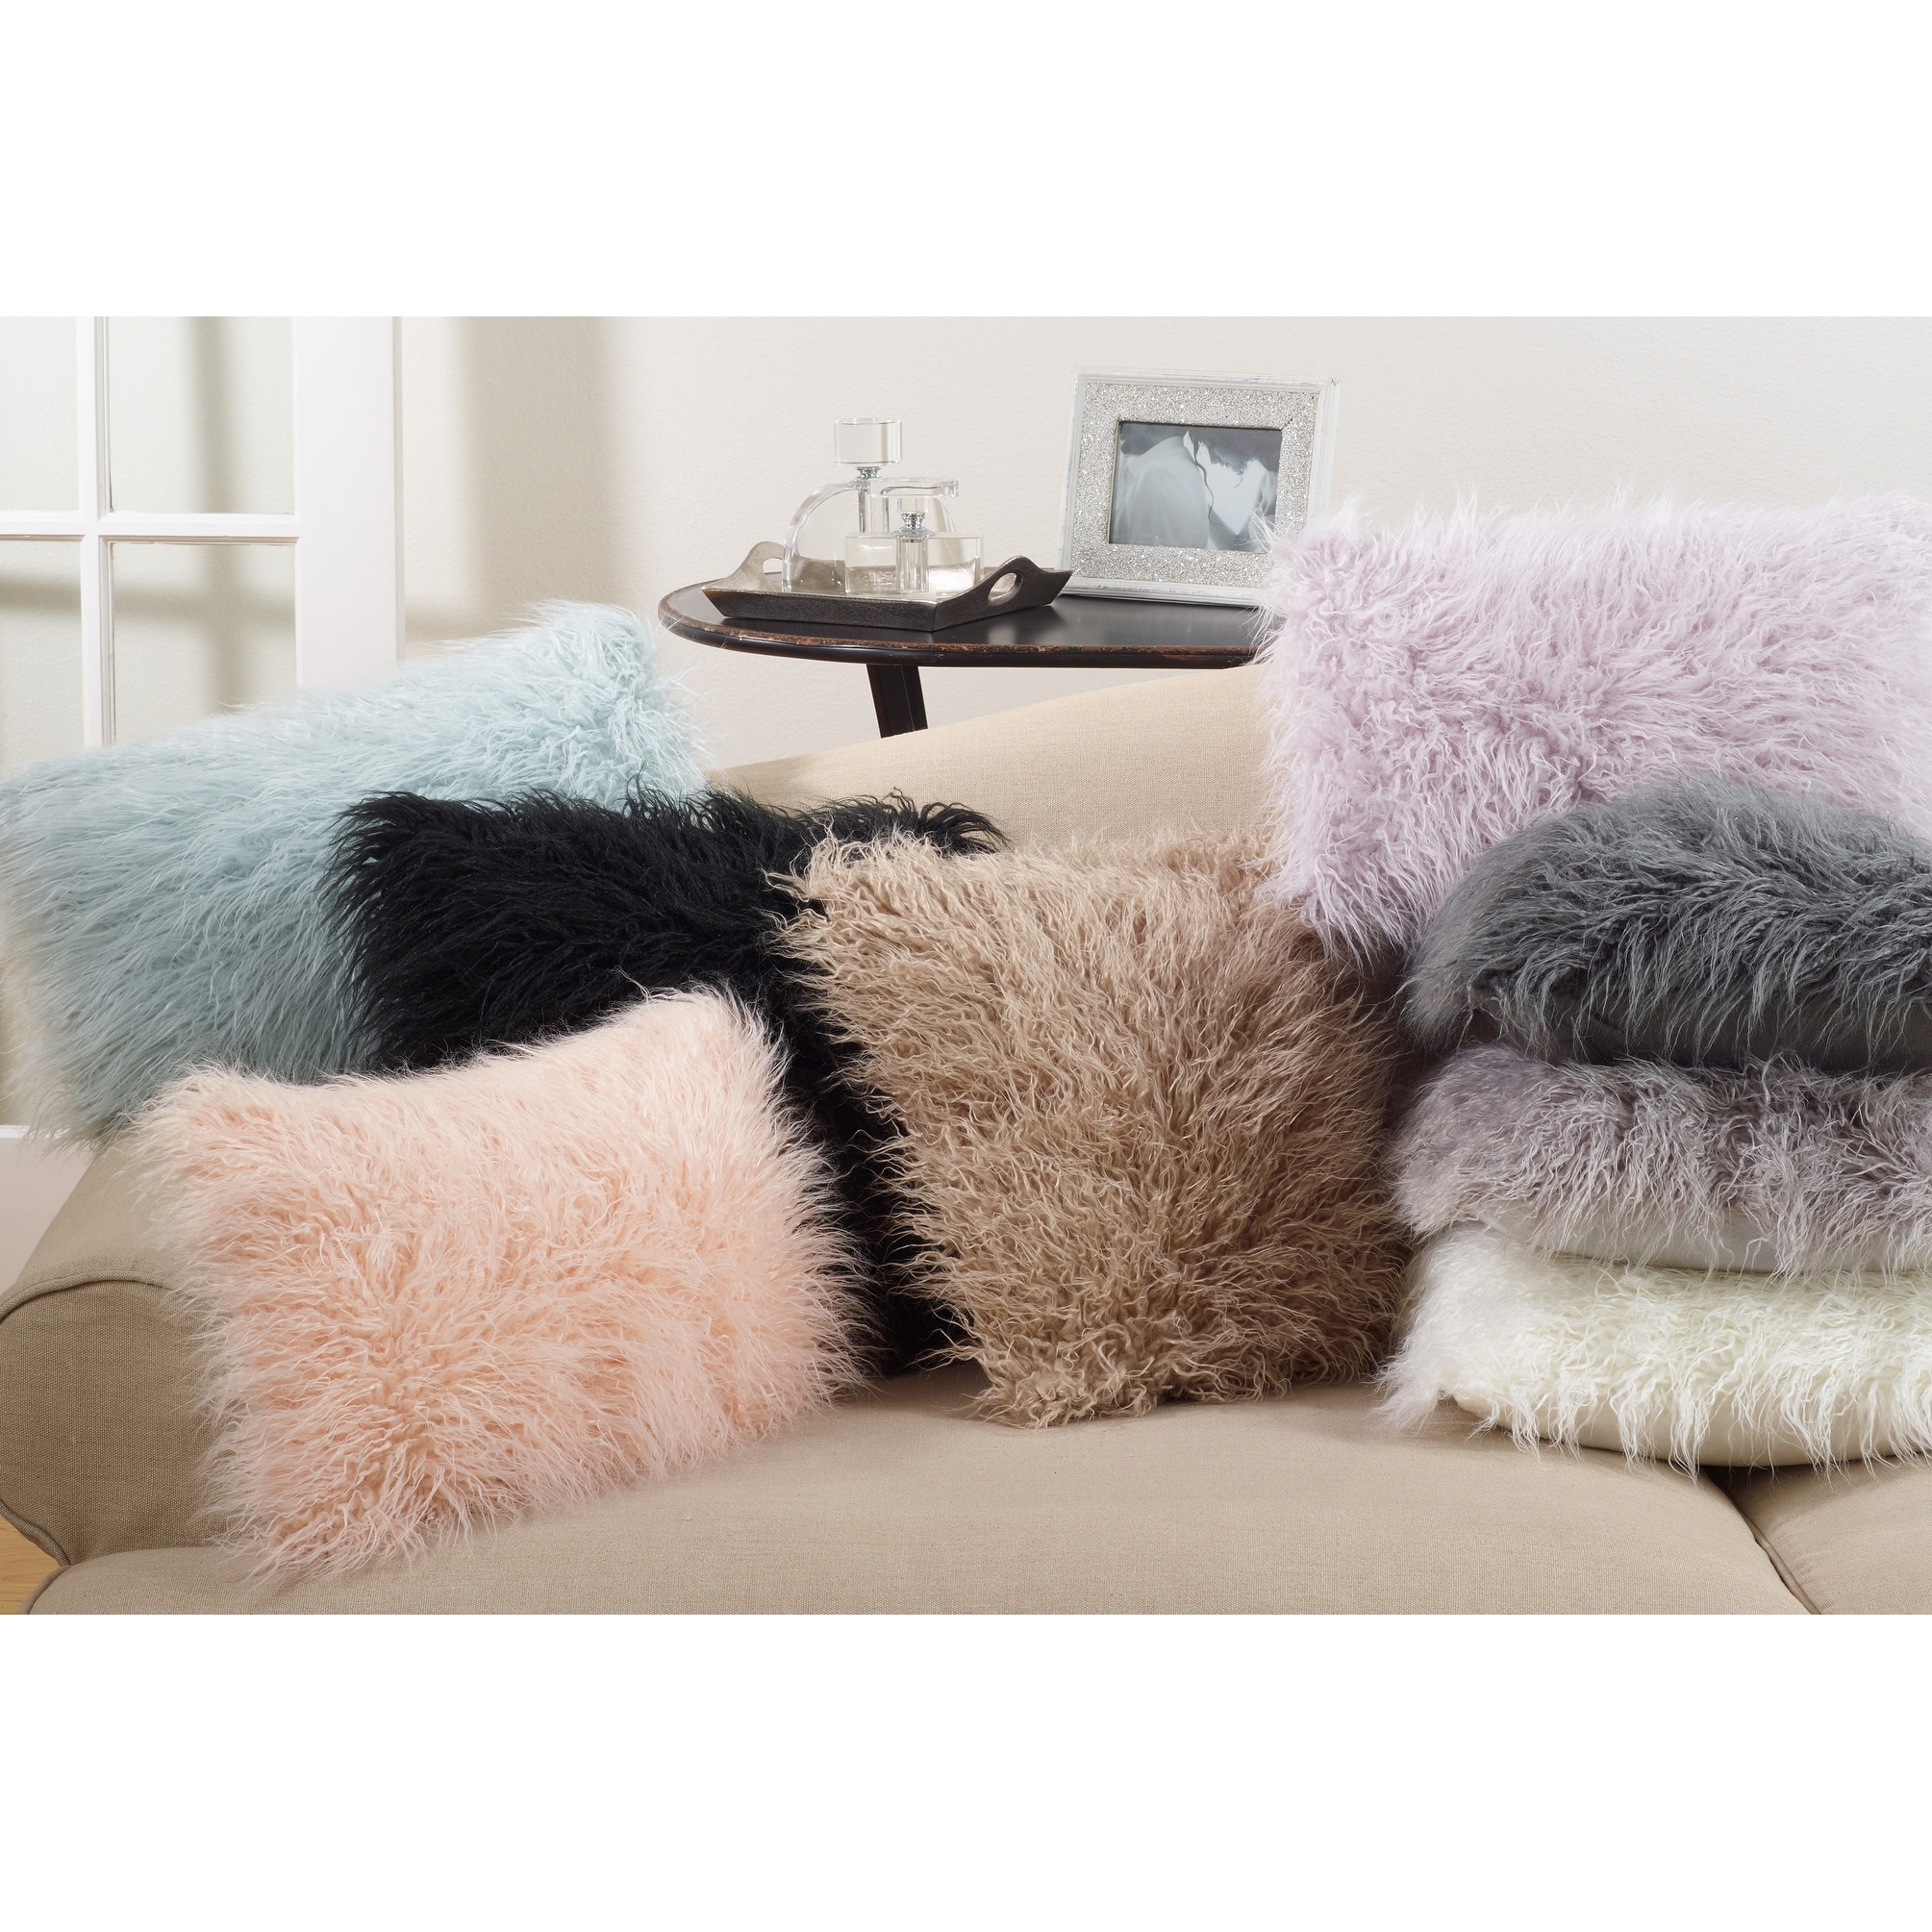 https://ak1.ostkcdn.com/images/products/is/images/direct/8f3346bf57241d5a6992535302d984c5b8640863/Mongolian-Faux-Fur-Throw-Pillow.jpg